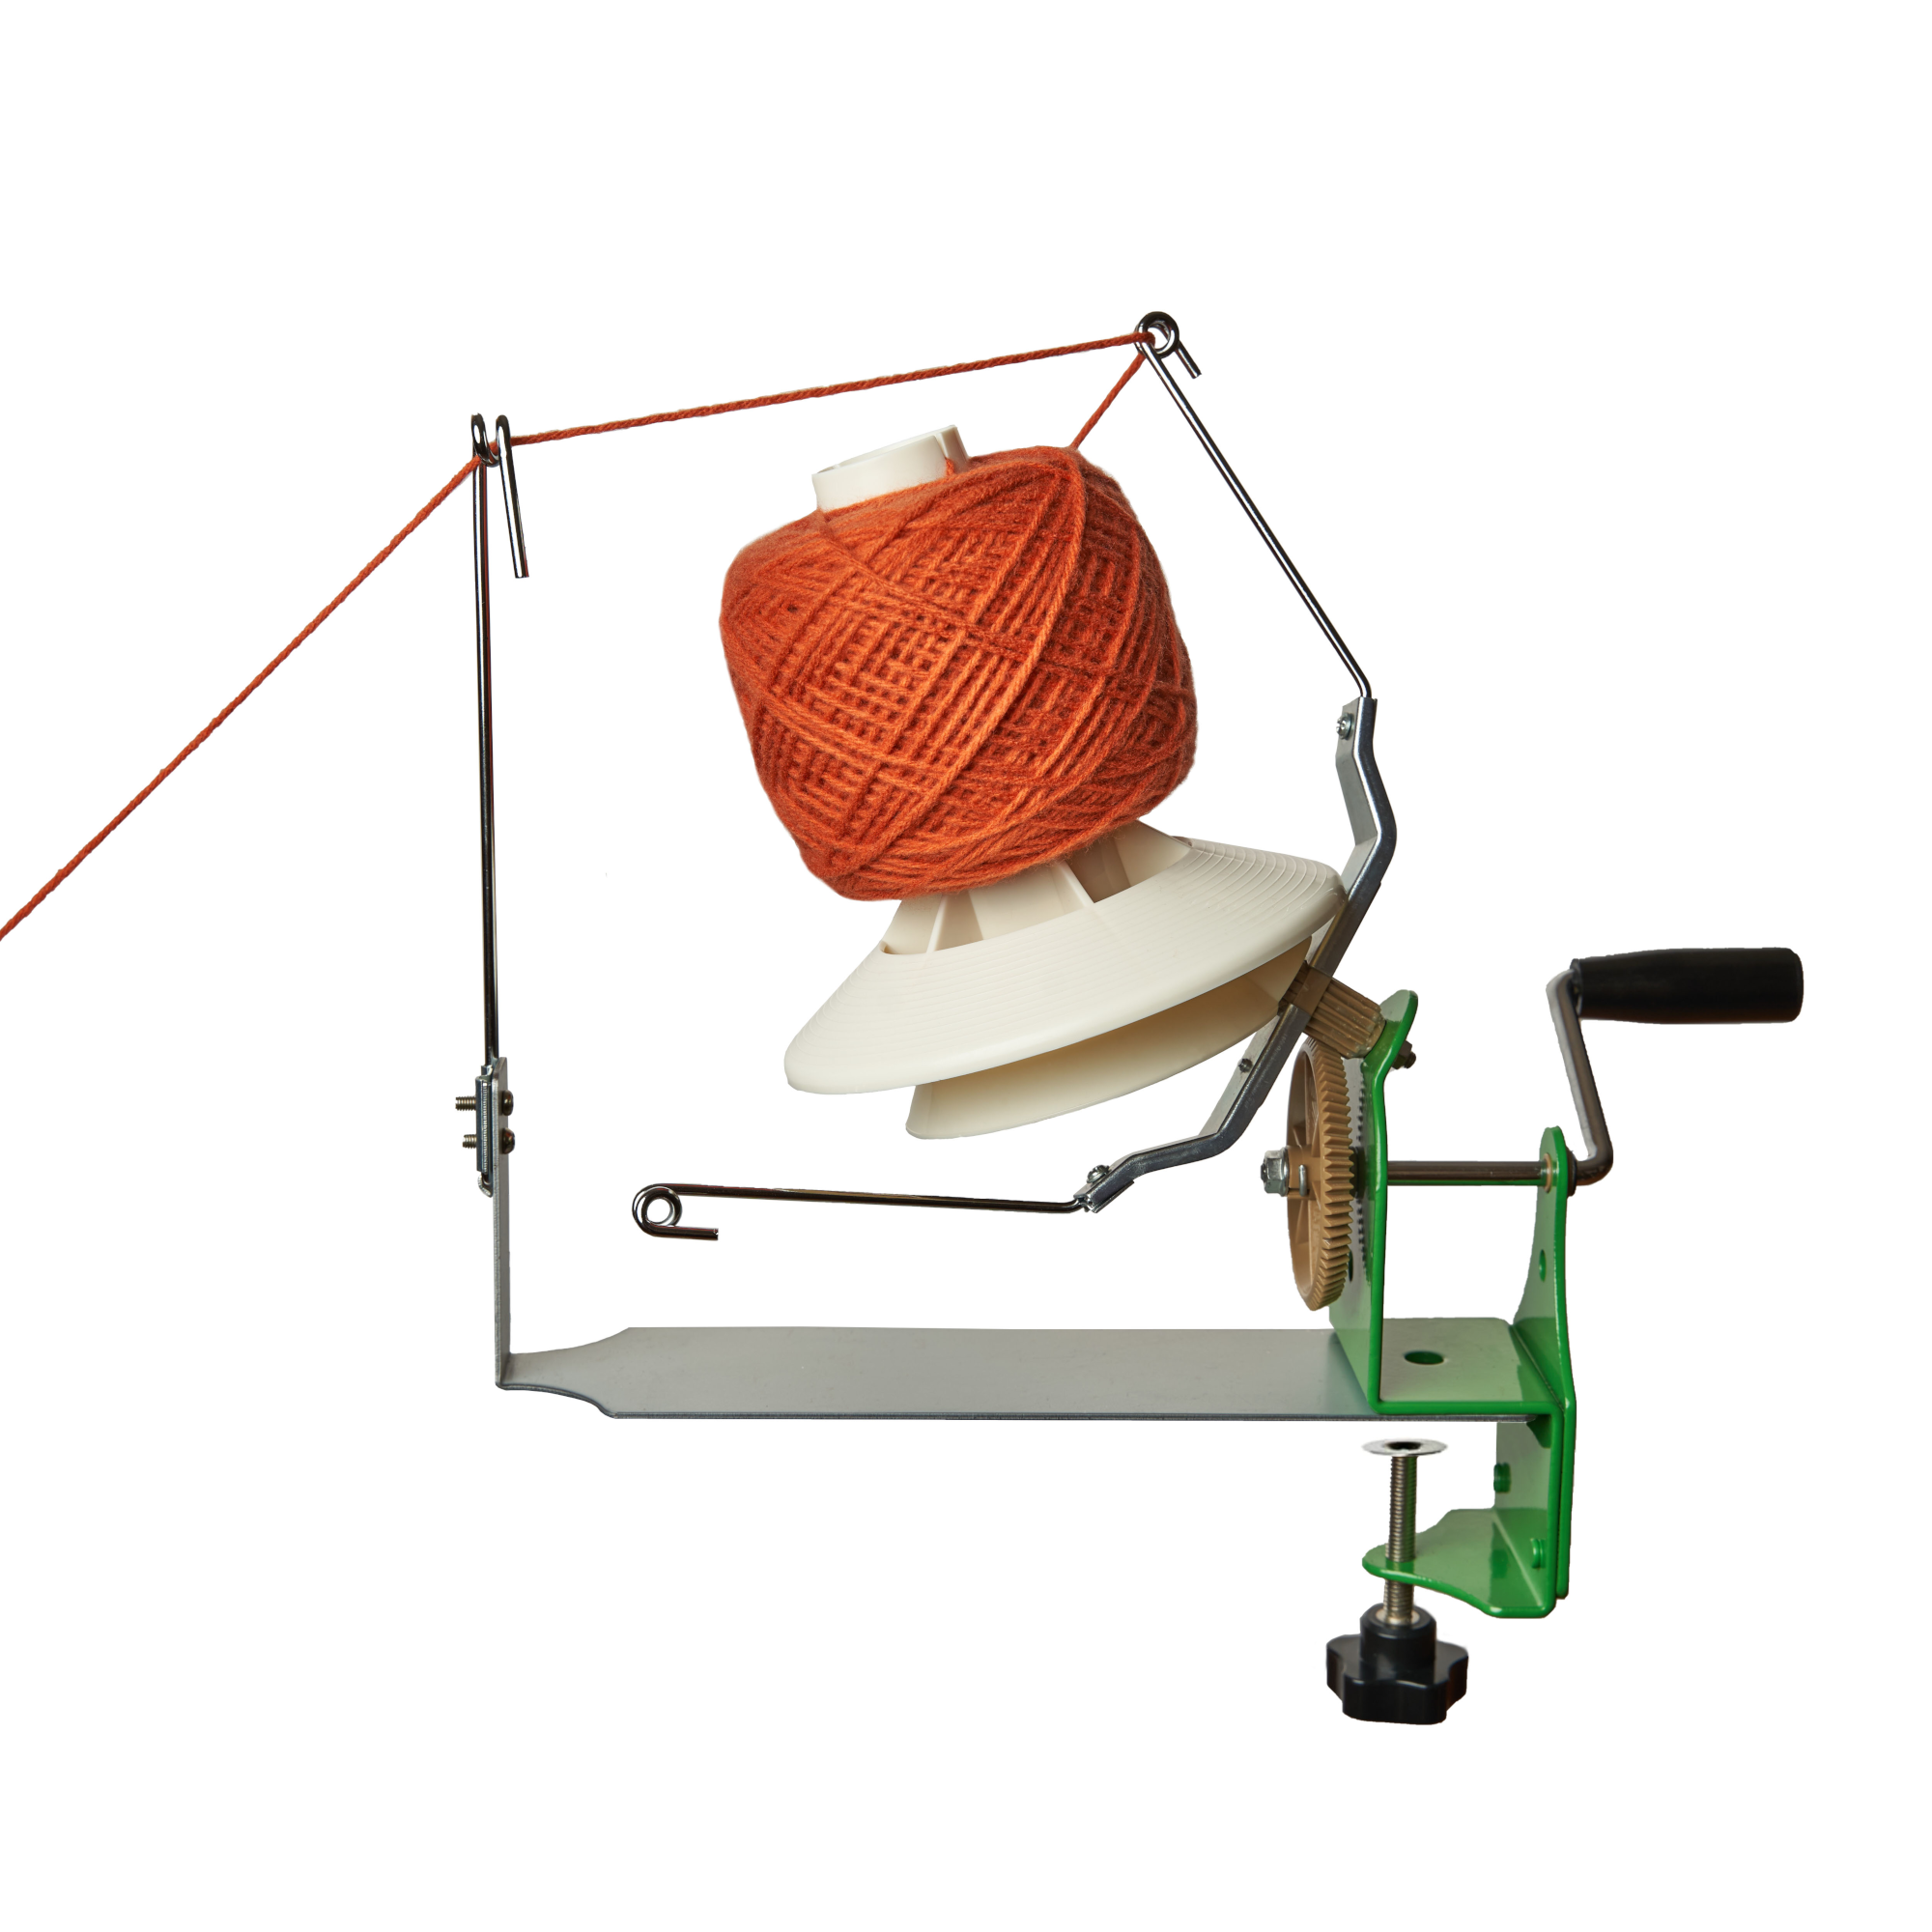 STANWOOD Large Yarn Ball Winder: Tips, Tricks & Product Review 